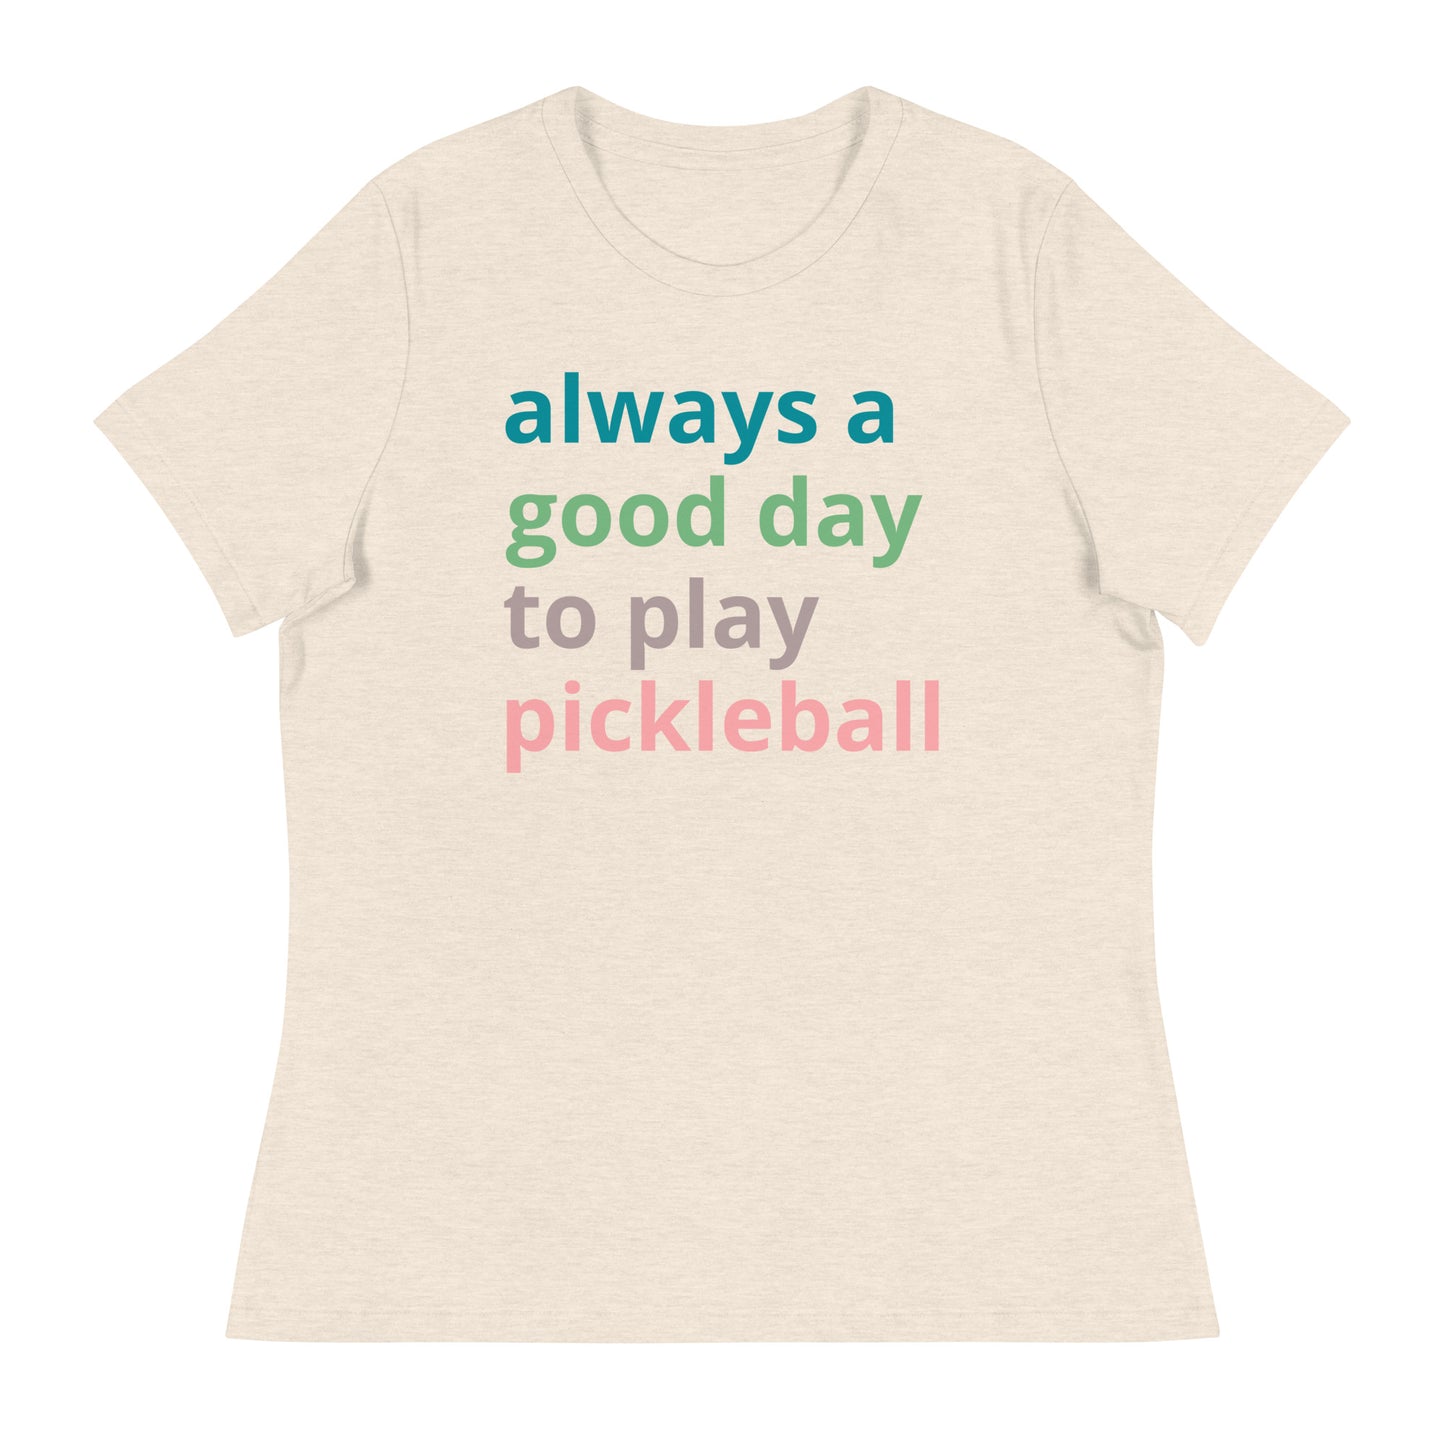 Good day to play pickleball - Women's Relaxed T-Shirt